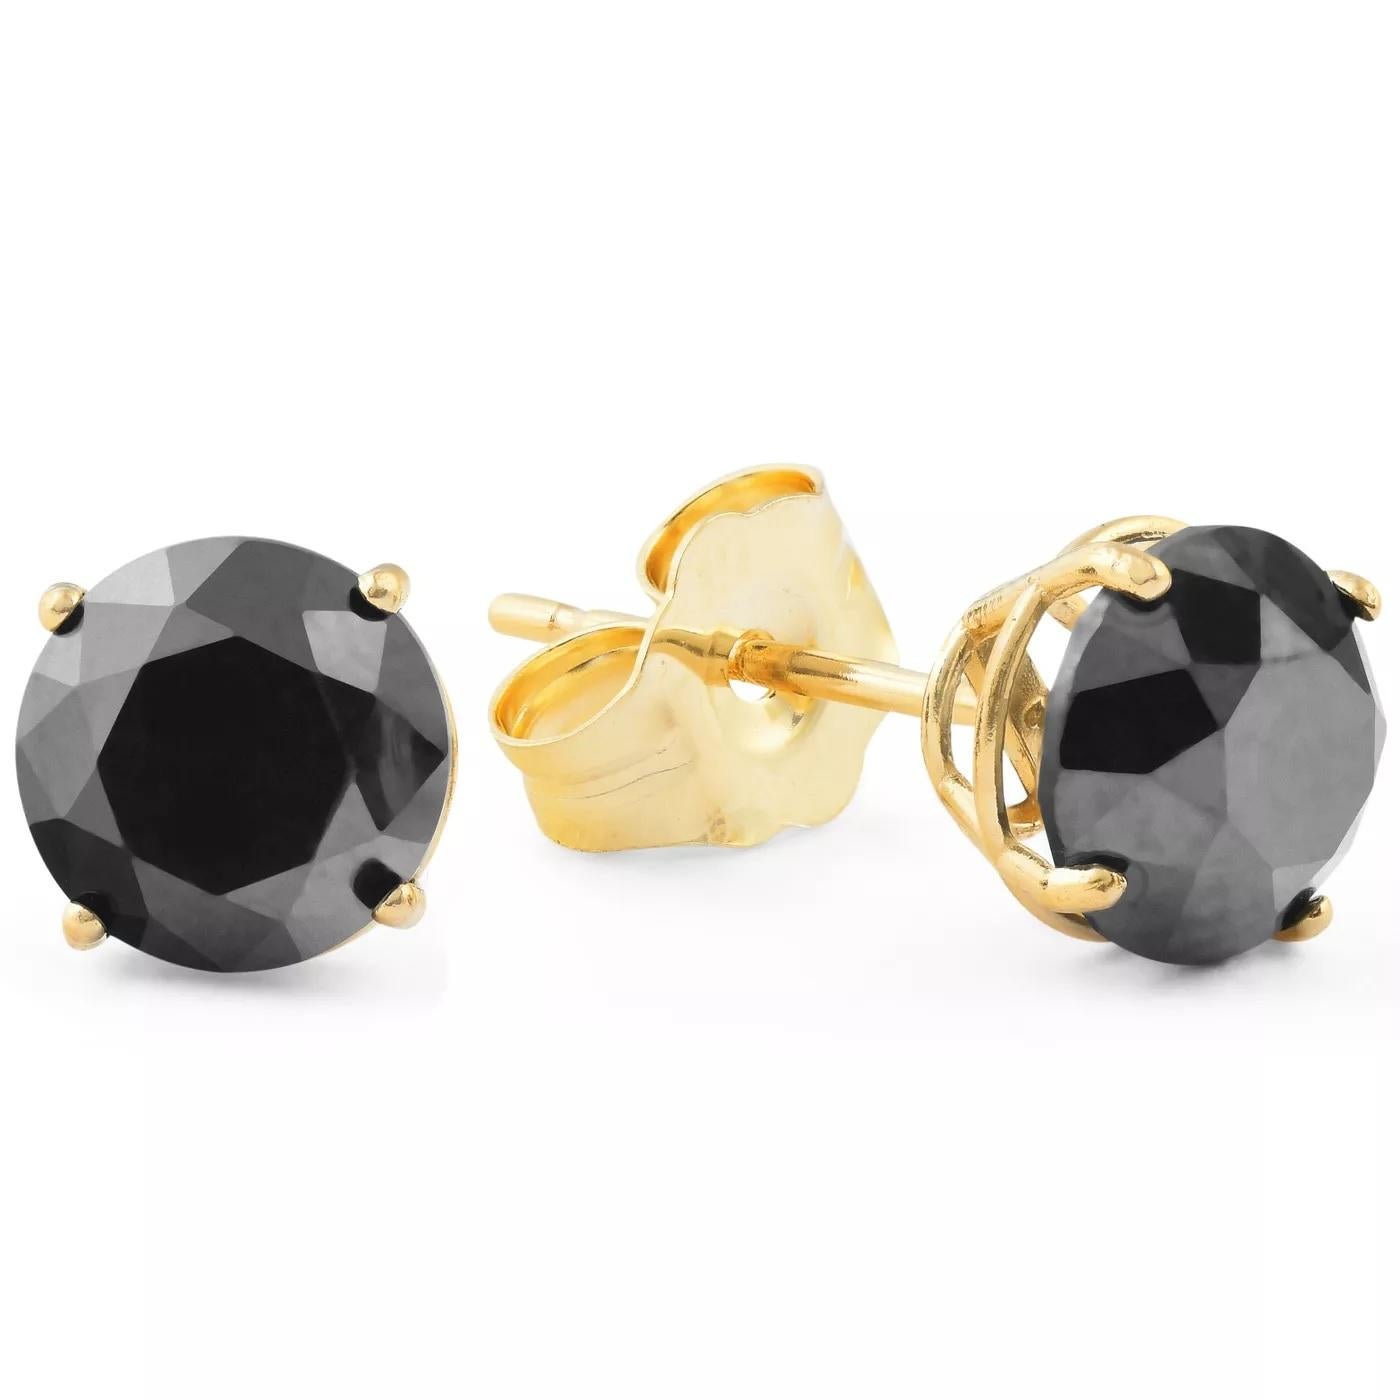 Alluring and refined, these diamond stud earrings are sure to be noticed. Created in 14 K yellow gold, the earring showcases a beguiling 1.35 carat natural black diamond solitaire measuring 6.71 x 6.75 x 4.37mm. Exquisitely made and Captivating with